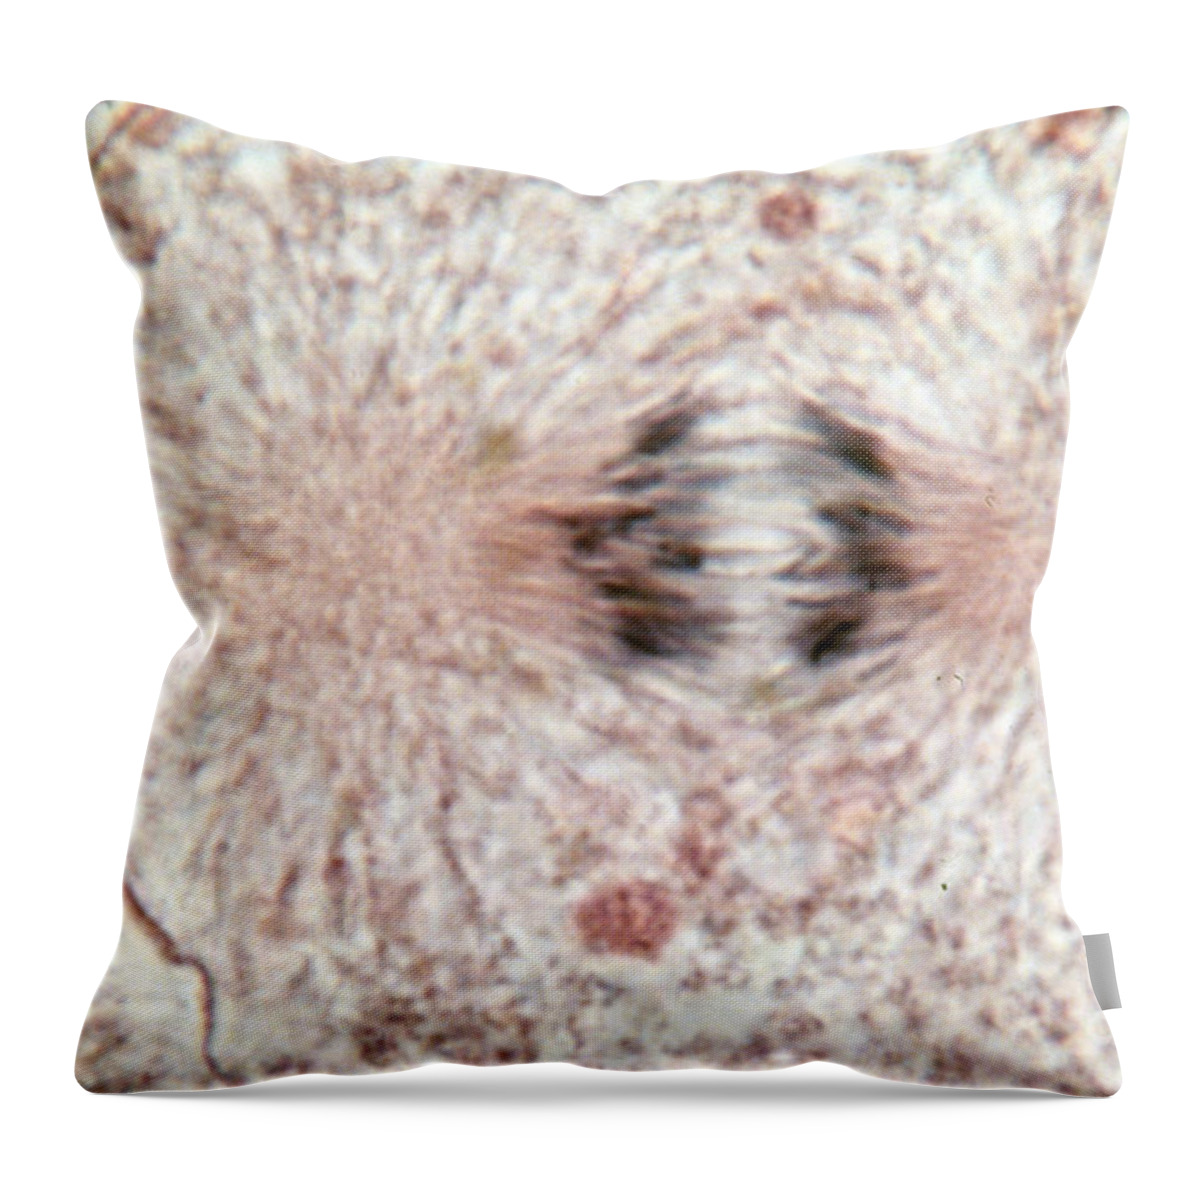 Cell Anatomy Throw Pillow featuring the photograph Whitefish Cells In Anaphase, Lm by Science Source